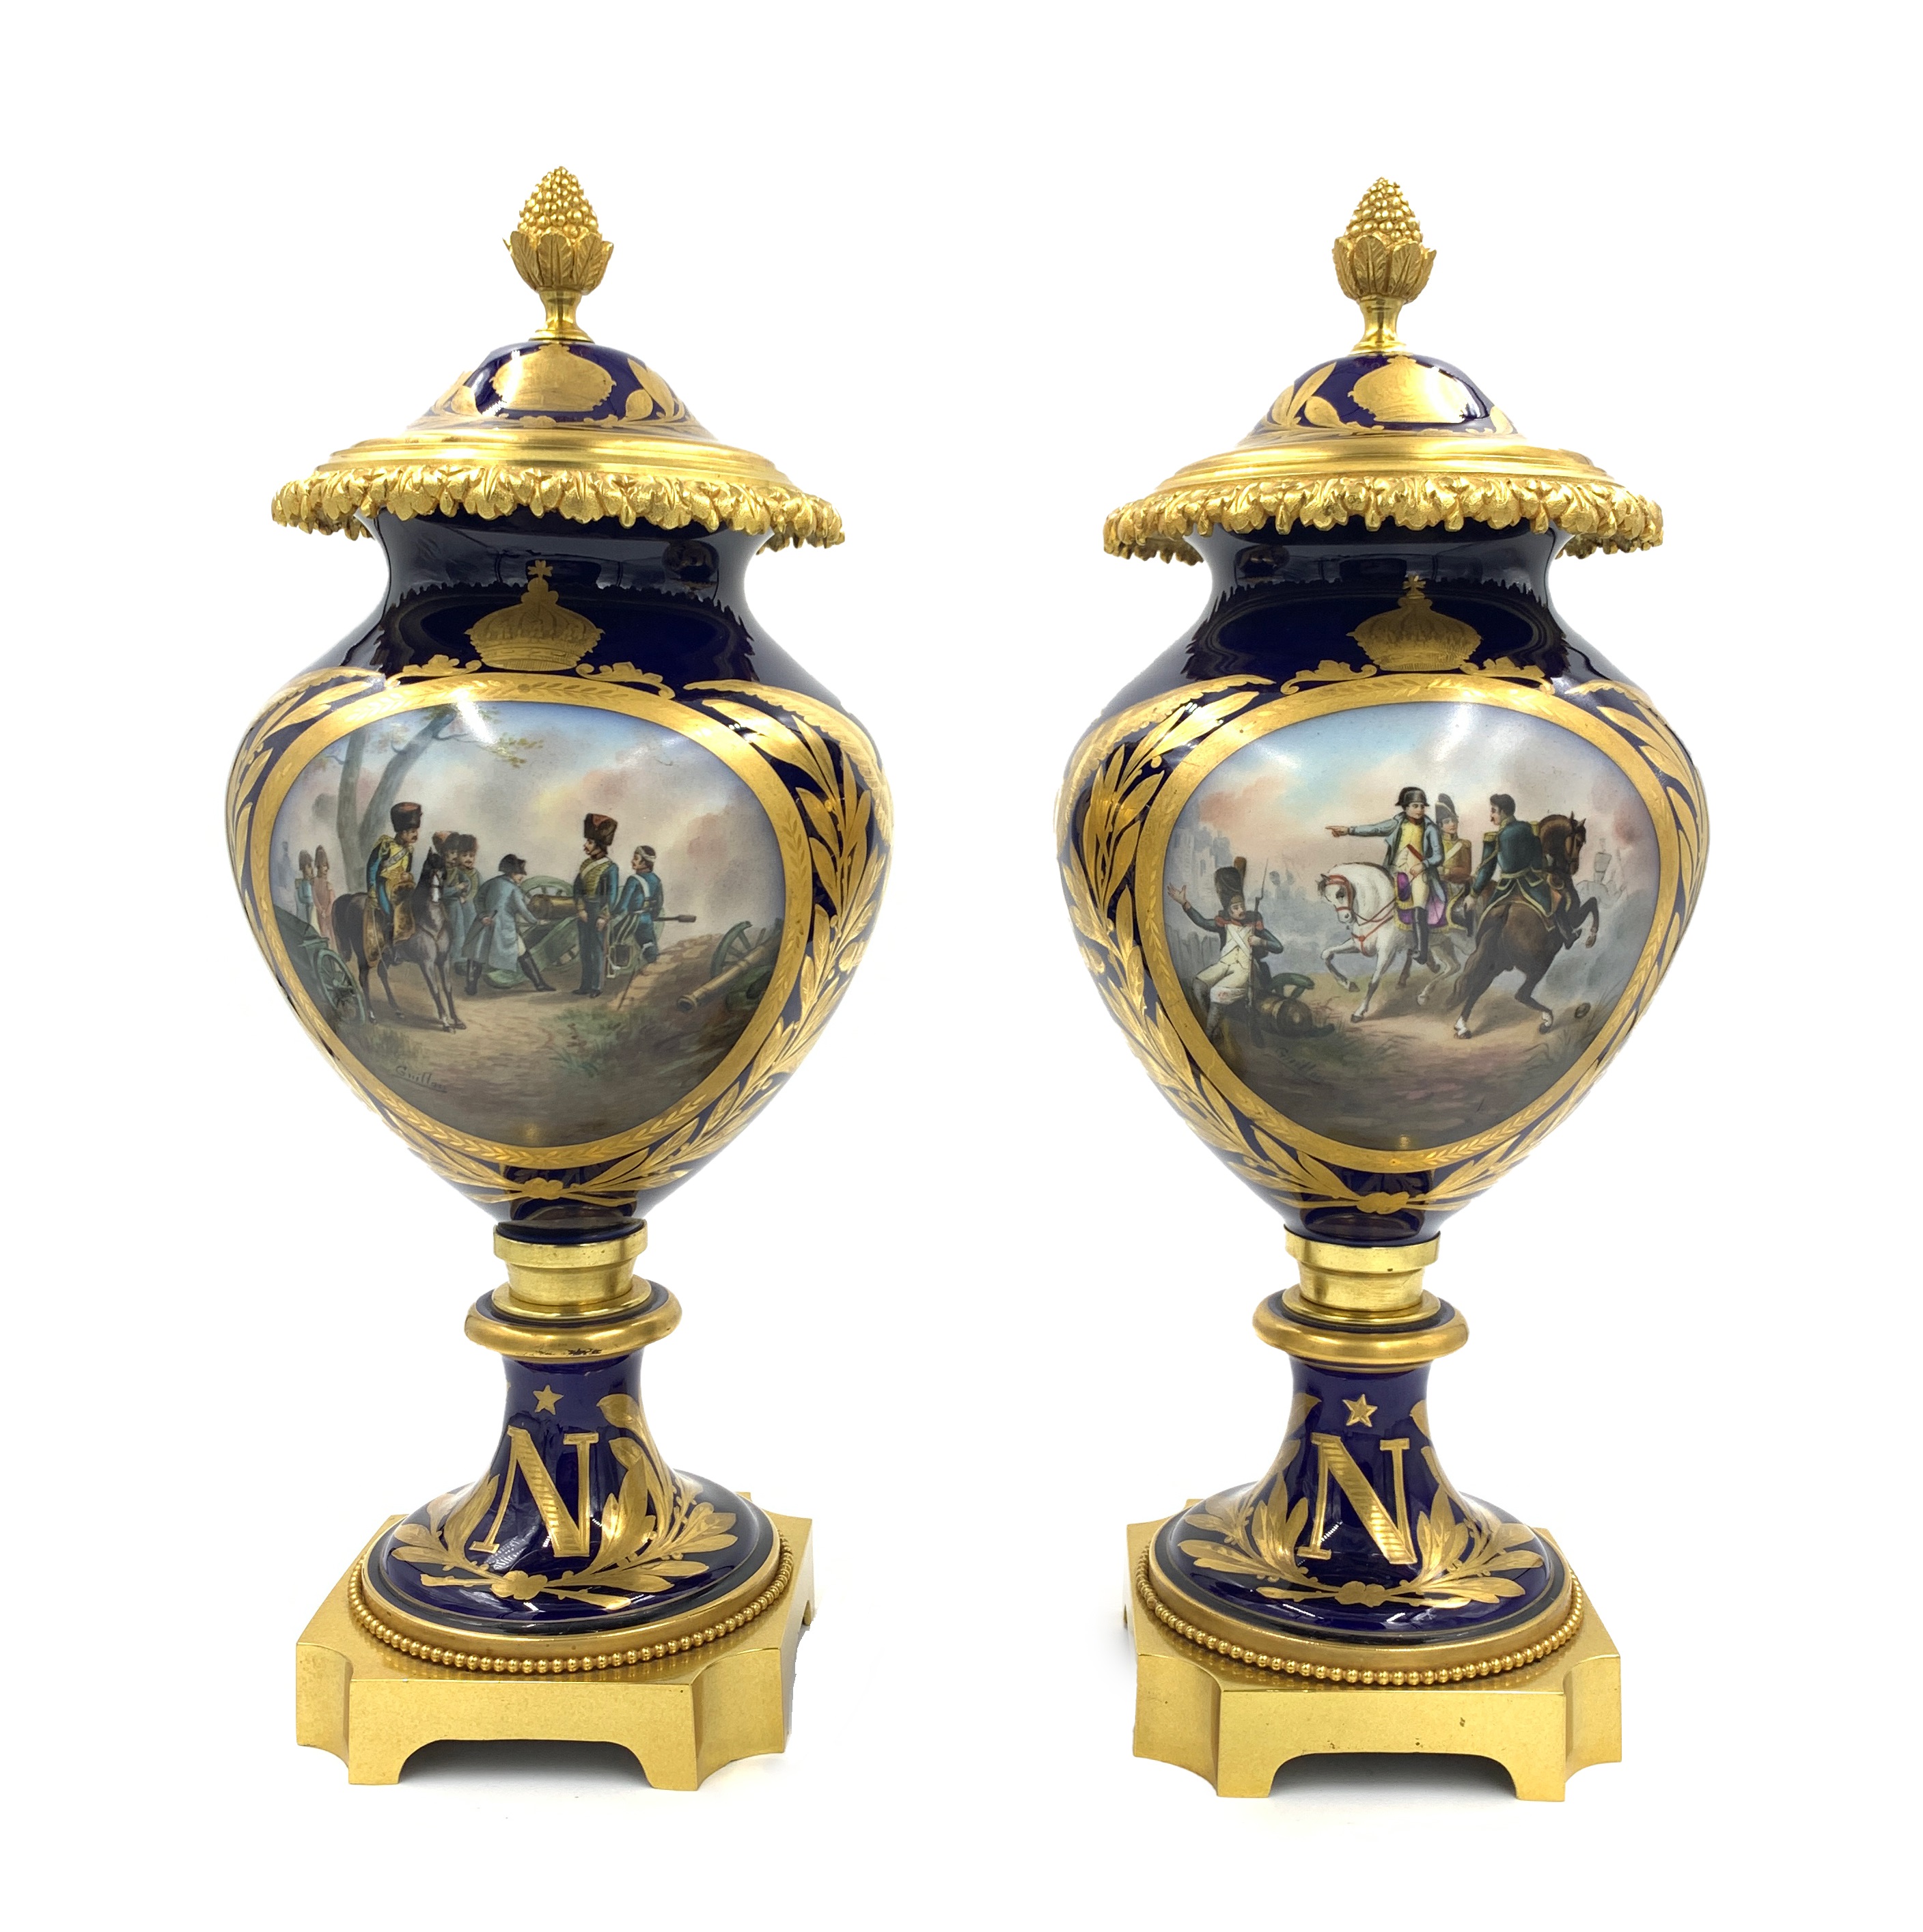 A FINE PAIR OF LATE 19TH / EARLY 20TH CENTURY SEVRES STYLE PORCELAIN NAPOLEON VASES - Image 2 of 14